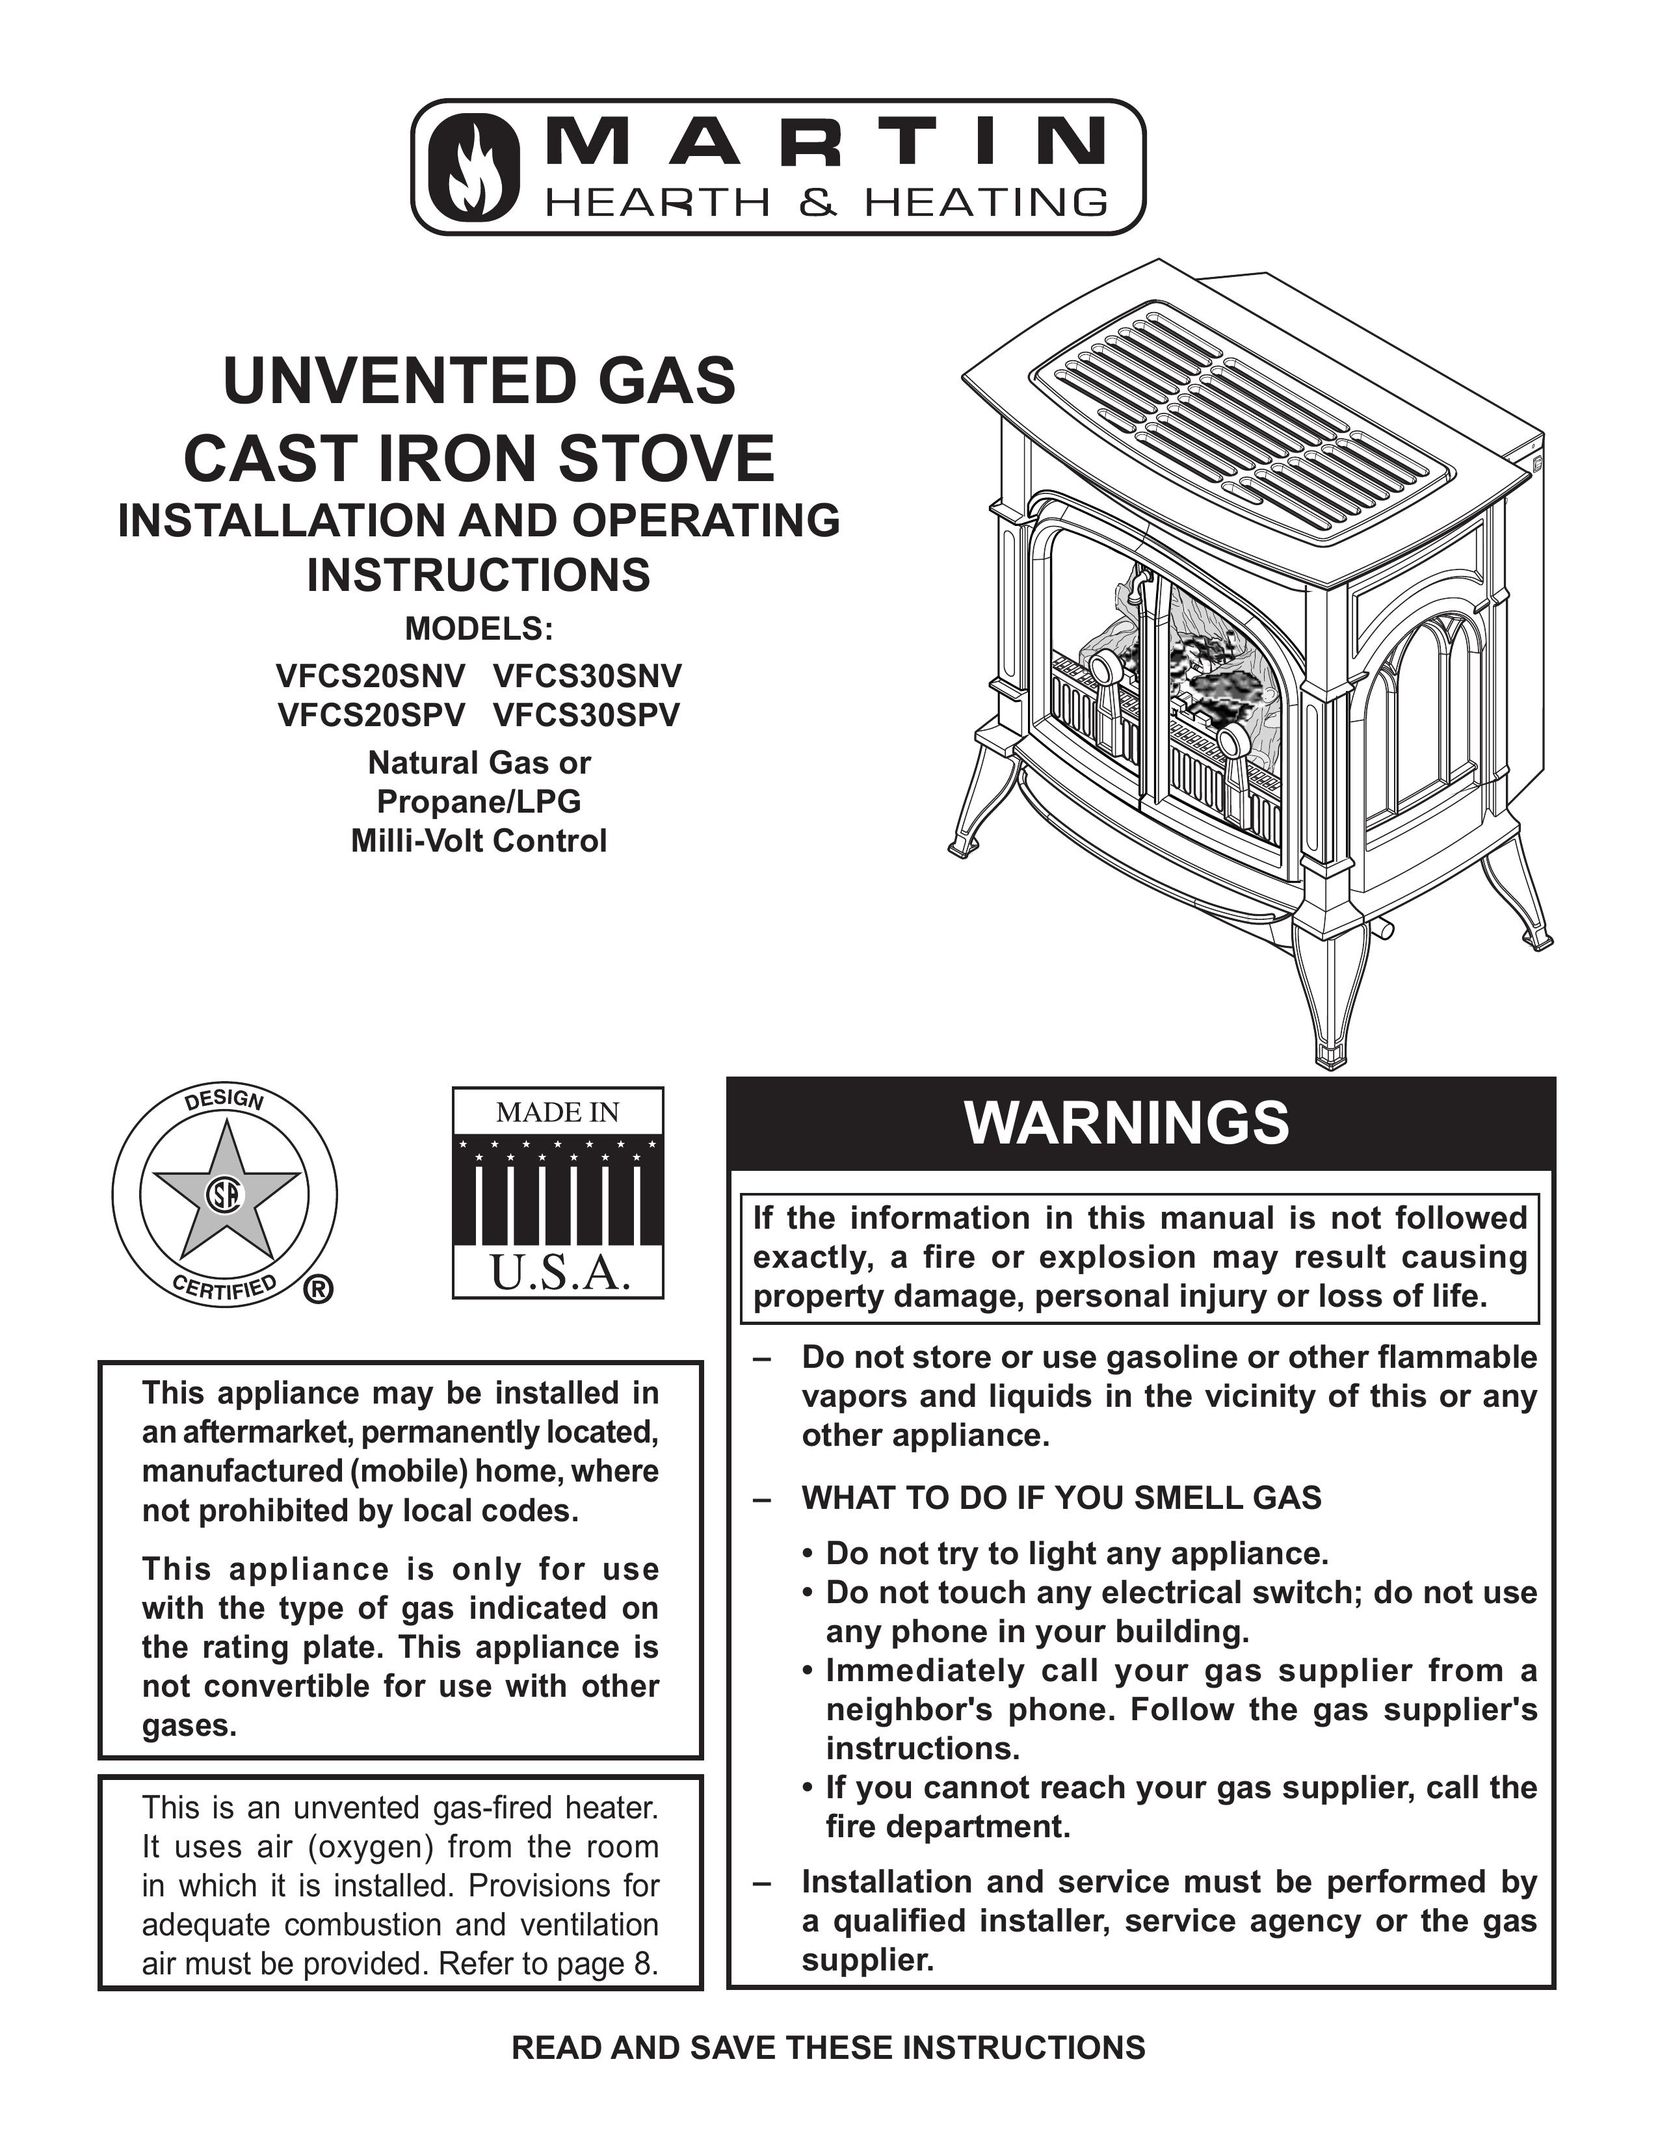 Martin Fireplaces VFCS20SNV Stove User Manual